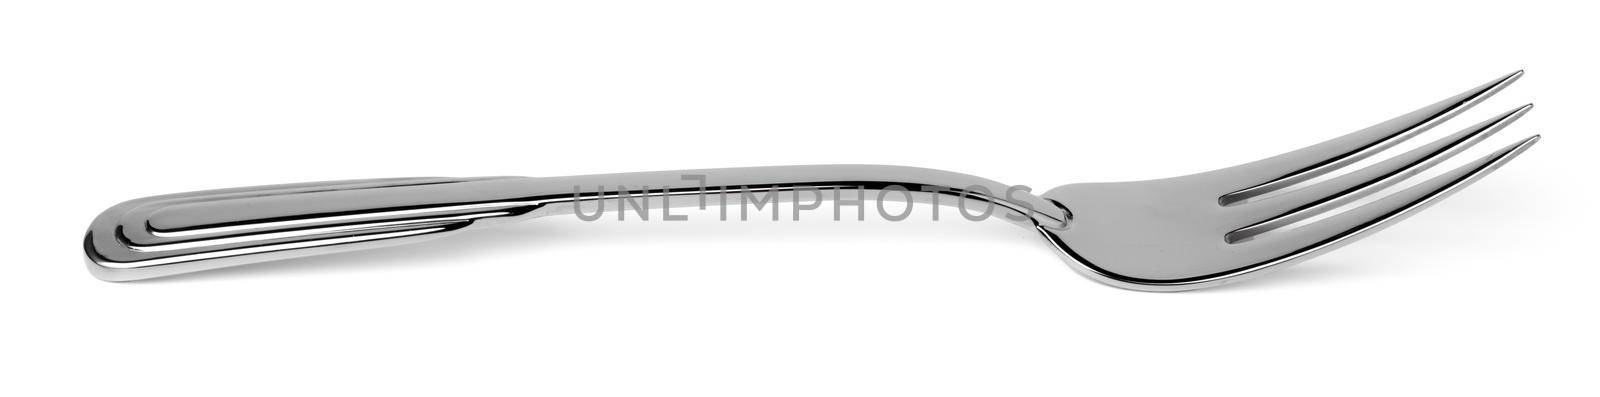 Steel metal fork isolated on white background by Fabrikasimf